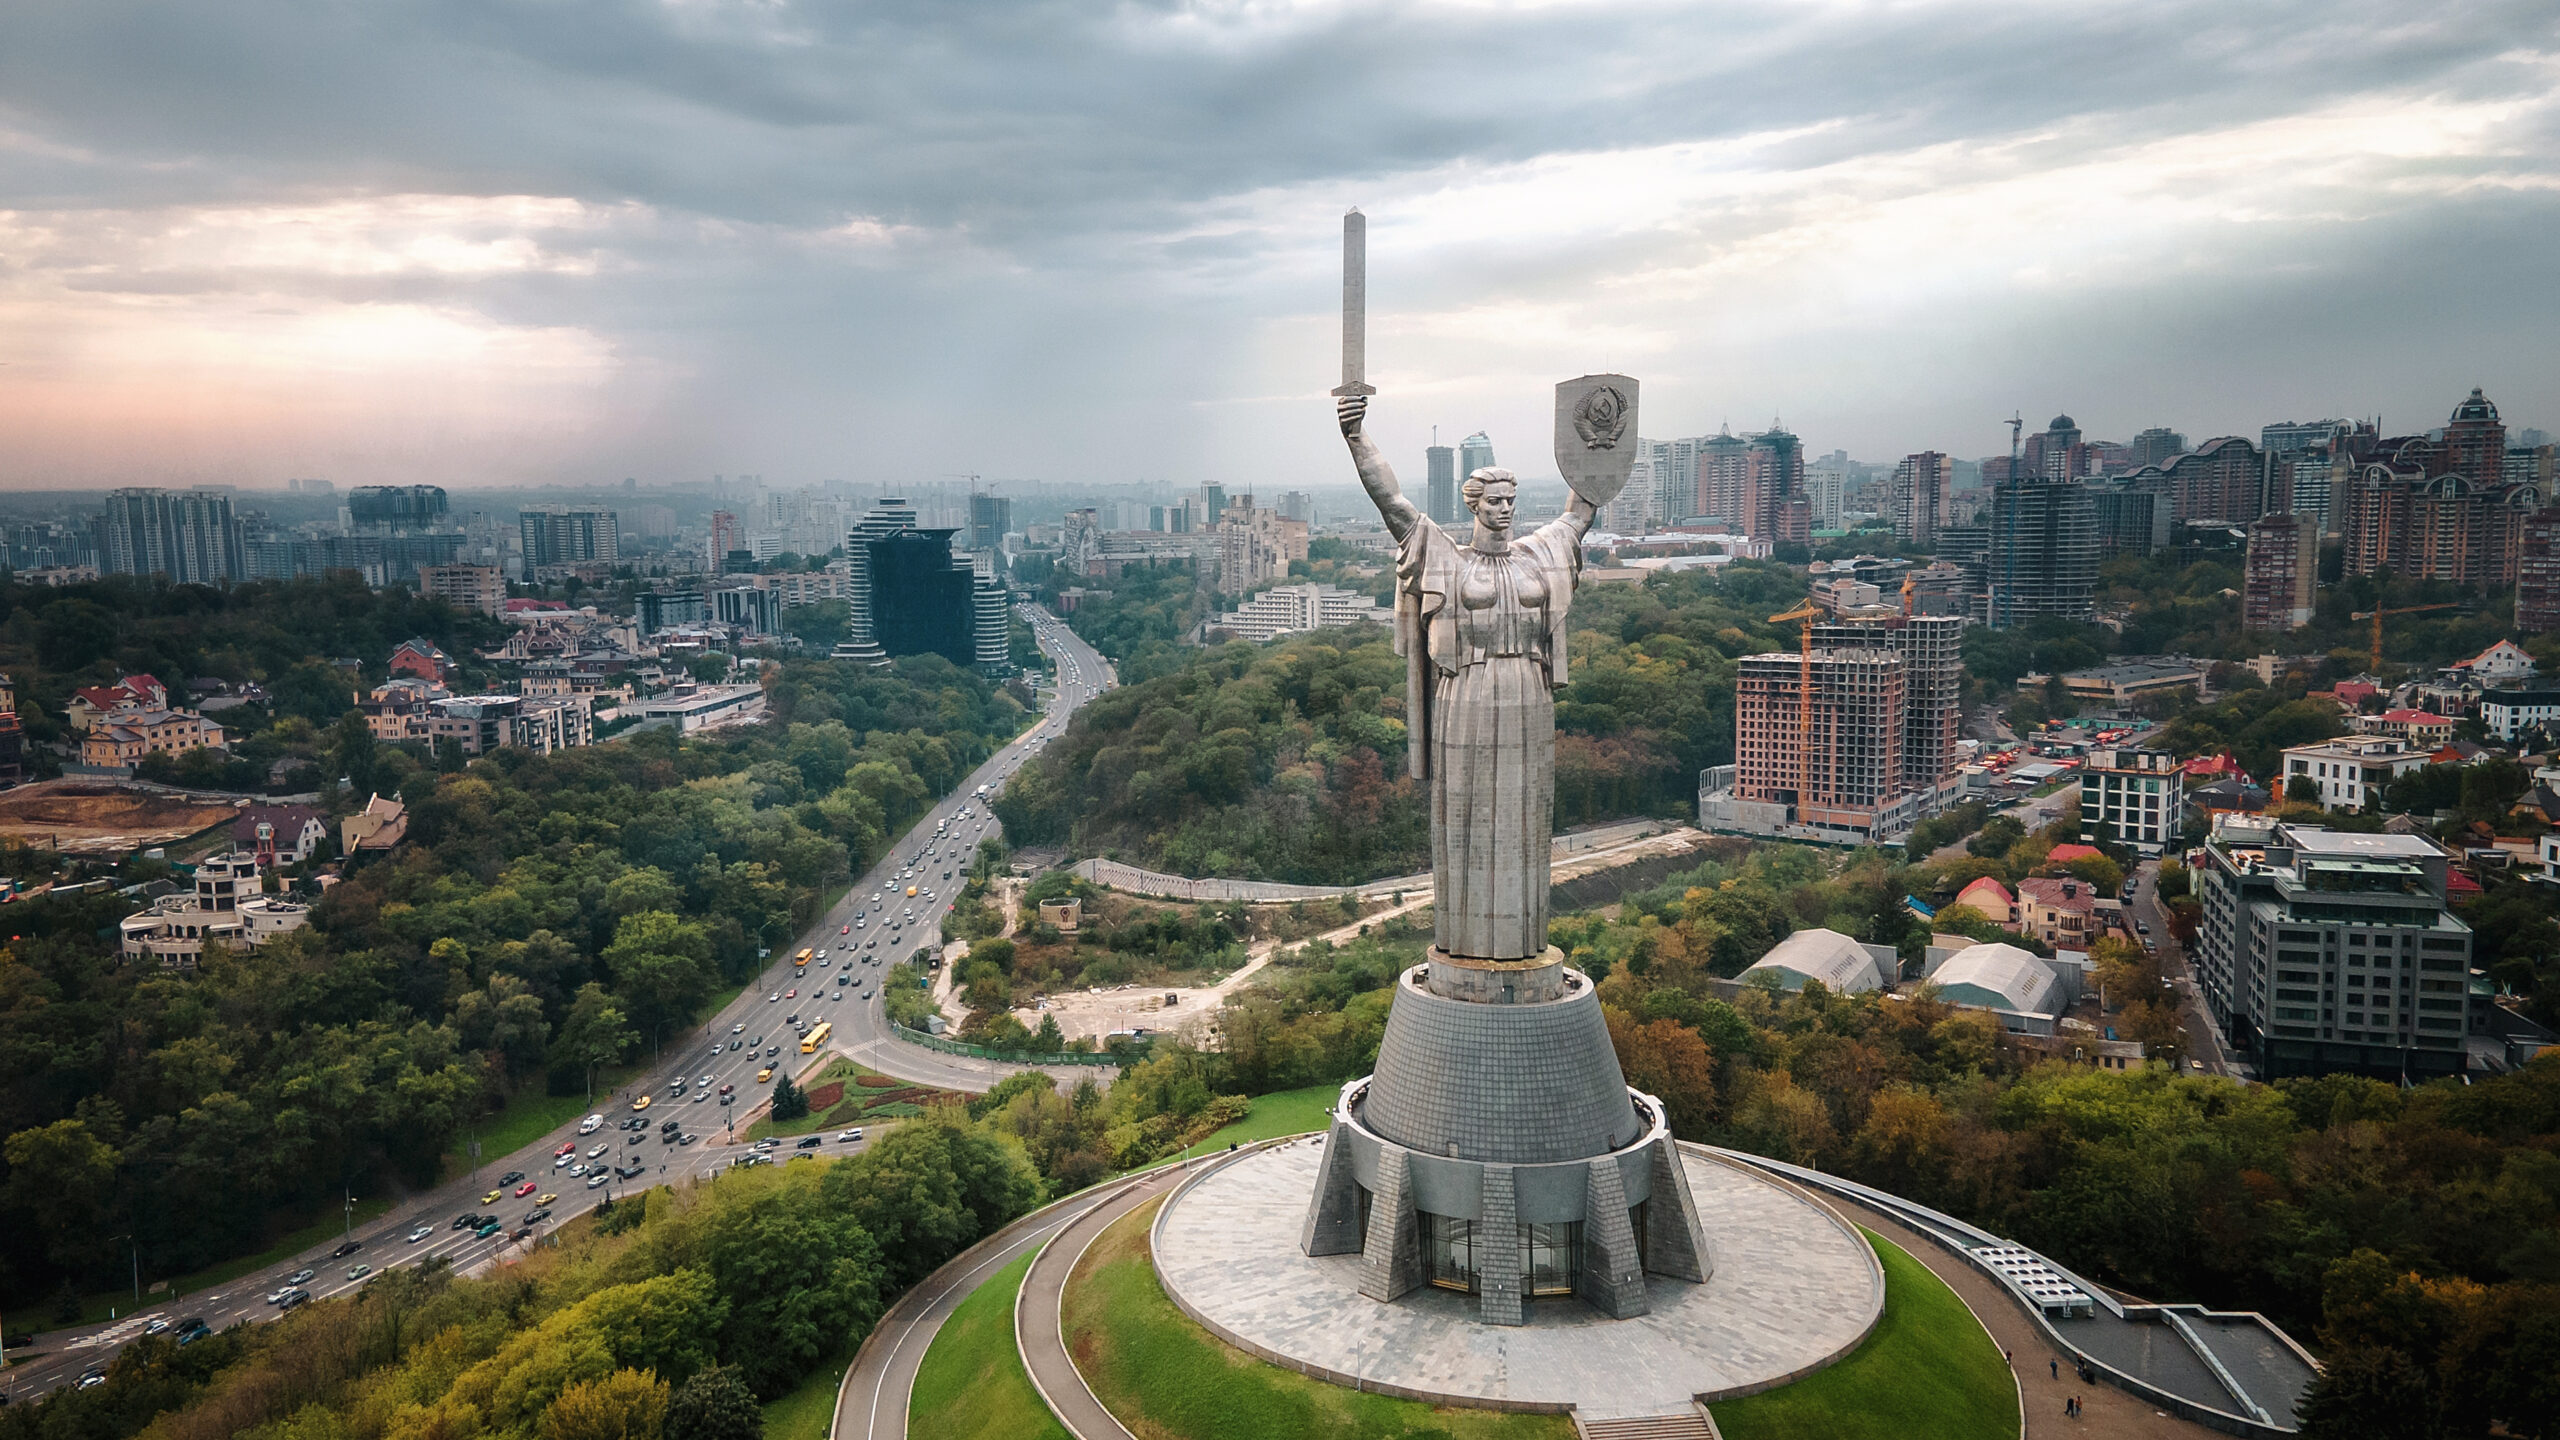 The Motherland Monument in Kyiv, a statue of a woman holding a sword and shield up. The city skyline is behind her.